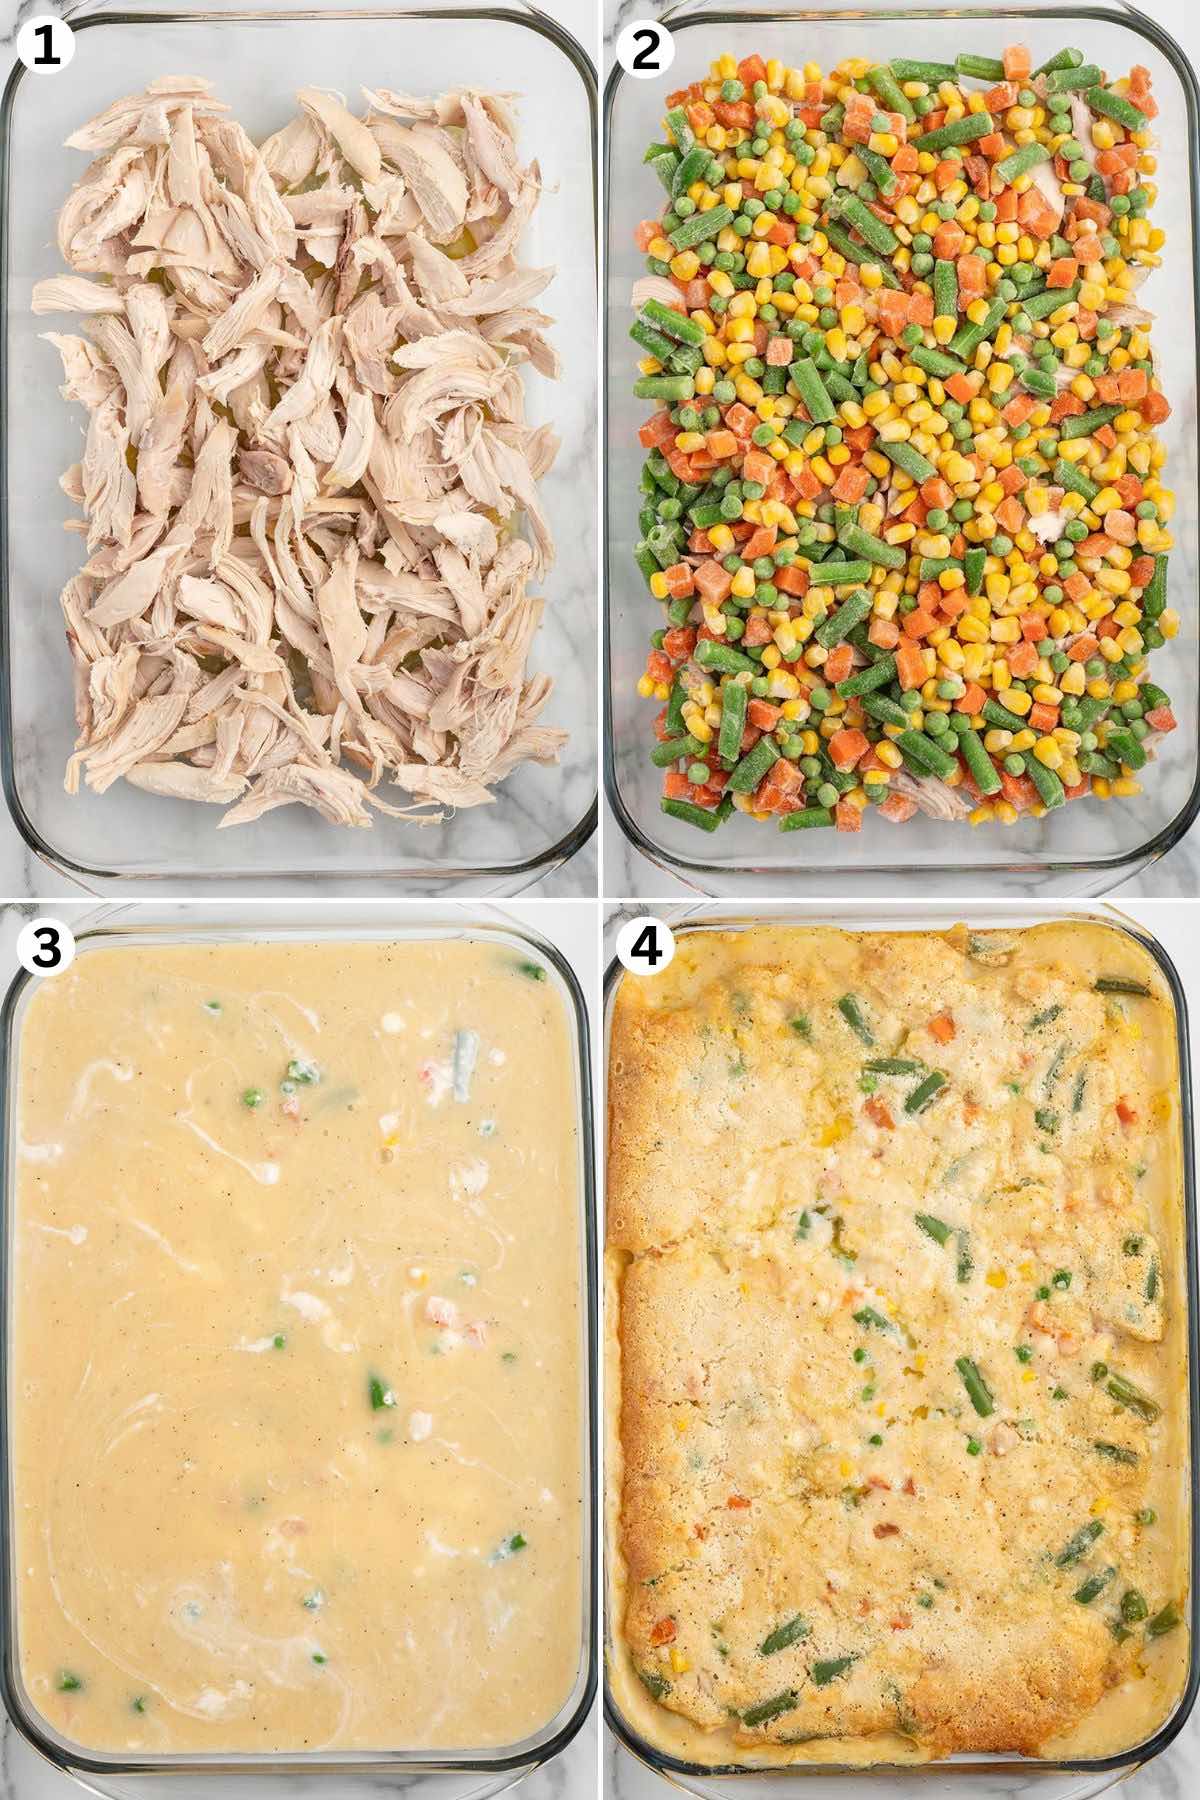 spread the shredded chicken. pour the frozen veggies on top of the chicken. pour the soup mixture and bake.